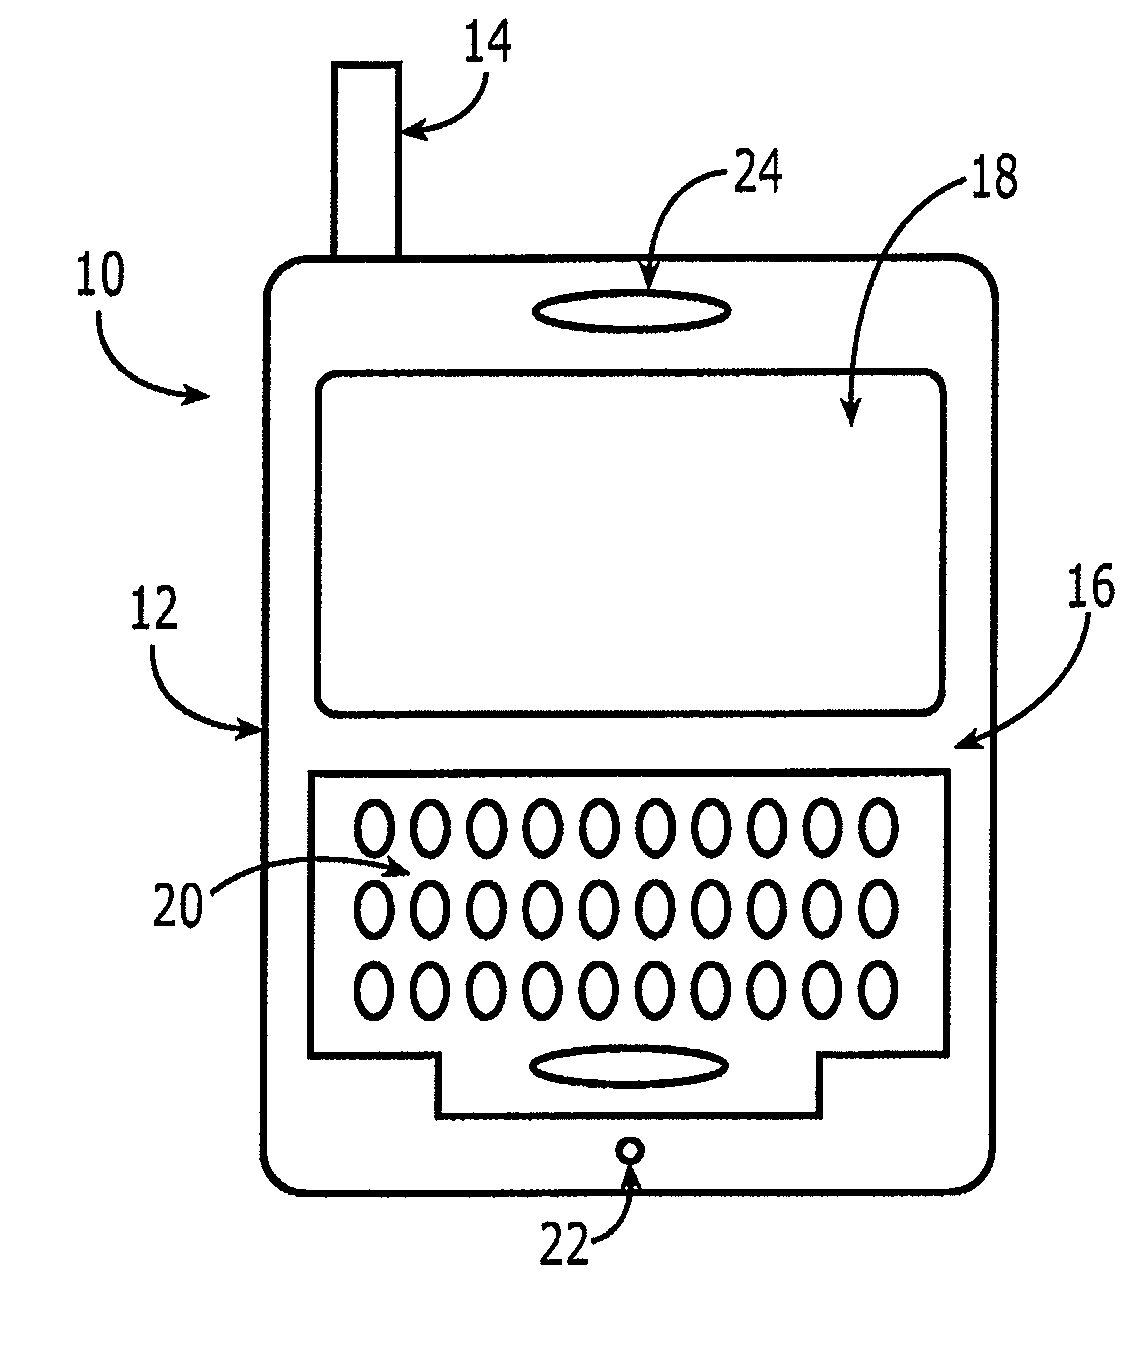 Apparatus and Method for Presenting and Controllably Scrolling Braille Text